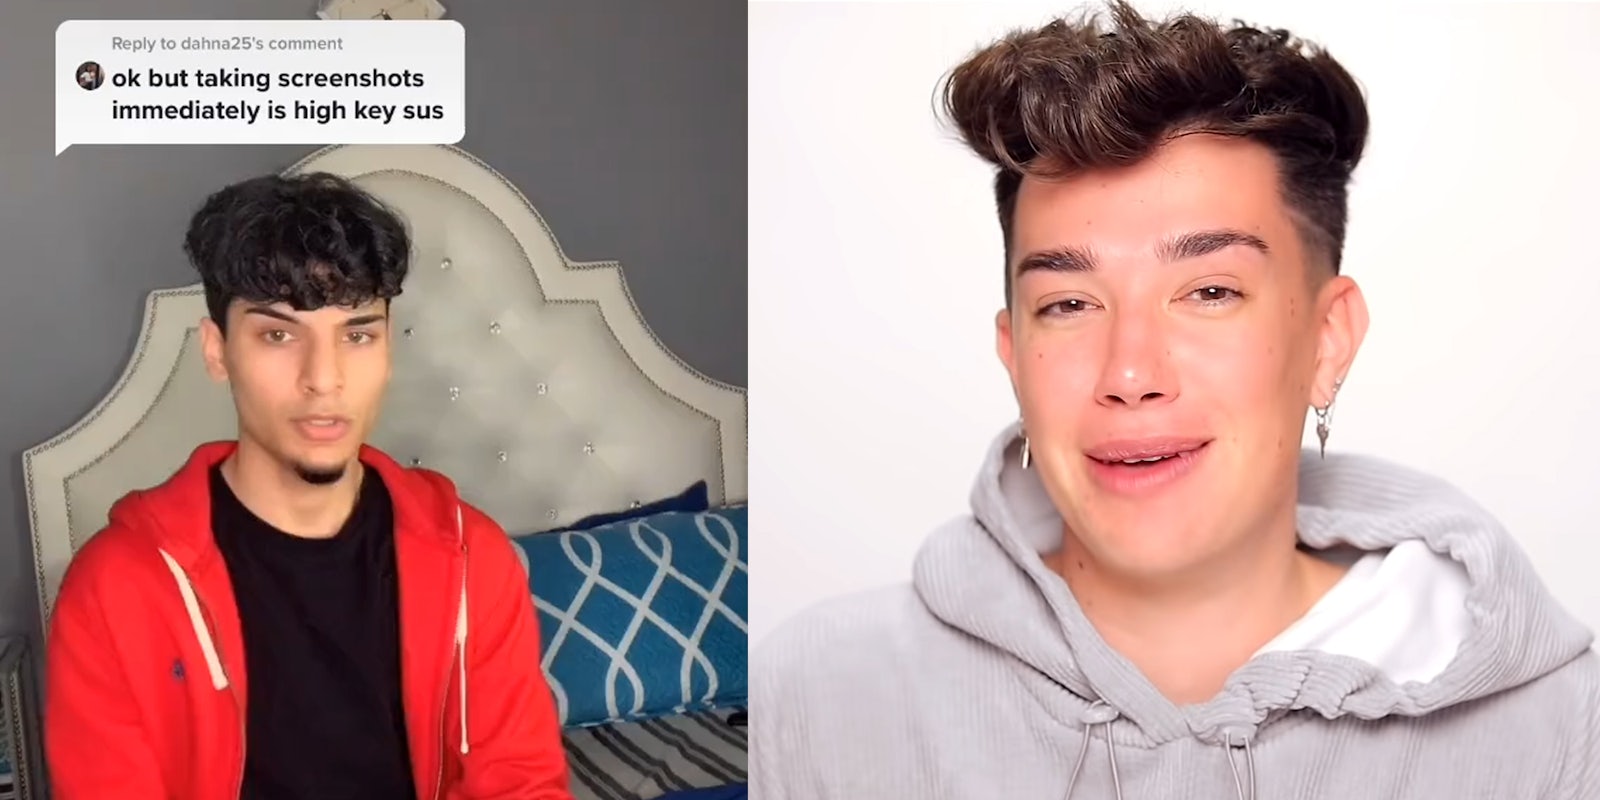 man in red sweatshirt with 'ok but taking screenshots immediately is high key sus' speech bubble above his head (left) james charles (right)